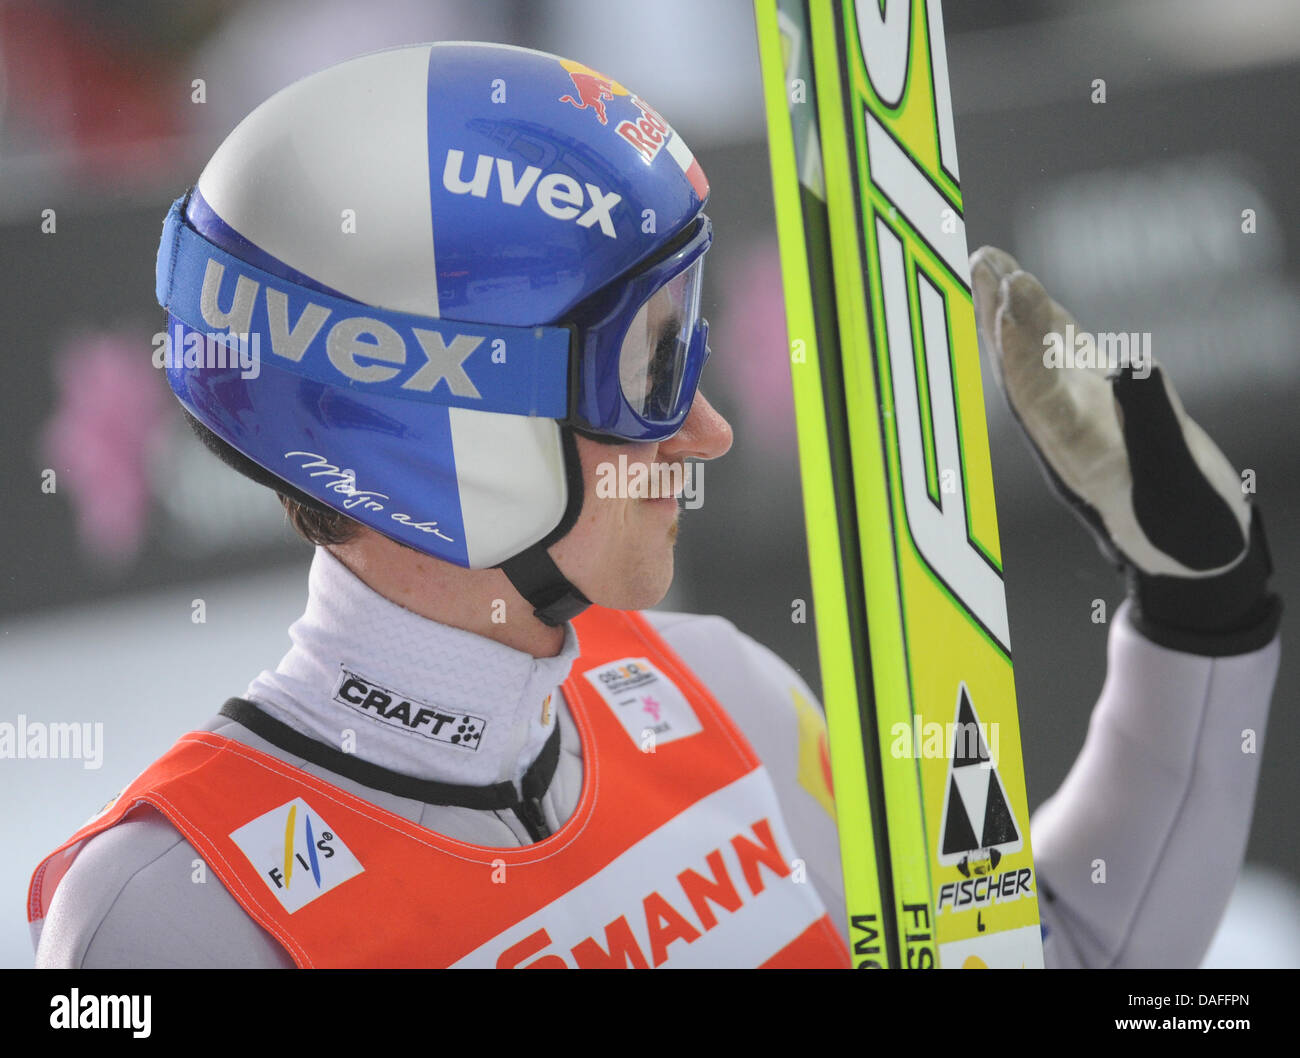 Adam Malysz of Poland reacts after the Men's Ski Jumping normal hill qualification at Holmenkollen ski stadium during the FIS Nordic Skiing World Championships in Oslo, Norway, 25 February 2011. Photo: PATRICK SEEGER Stock Photo